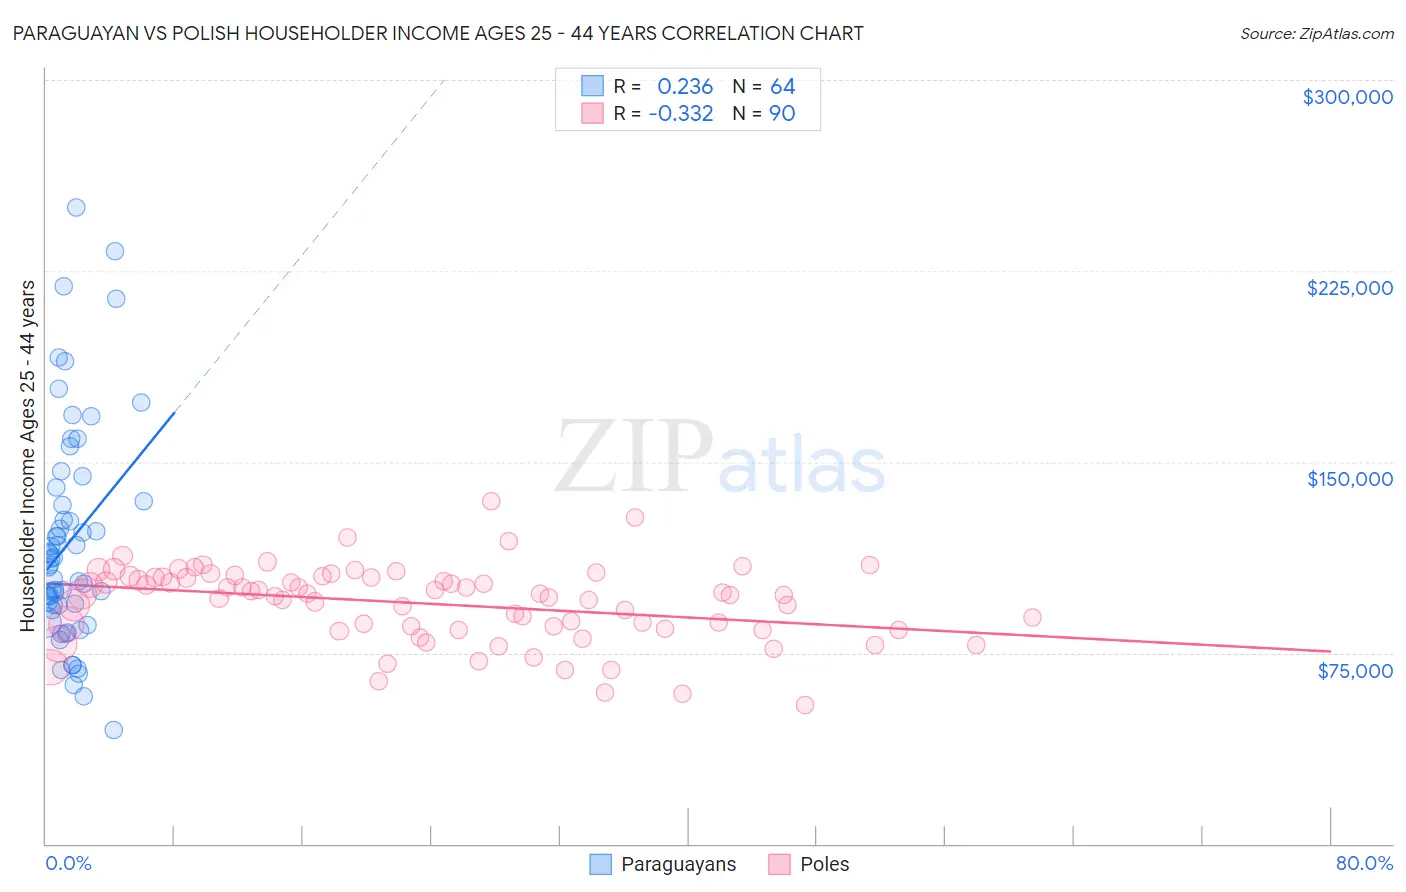 Paraguayan vs Polish Householder Income Ages 25 - 44 years